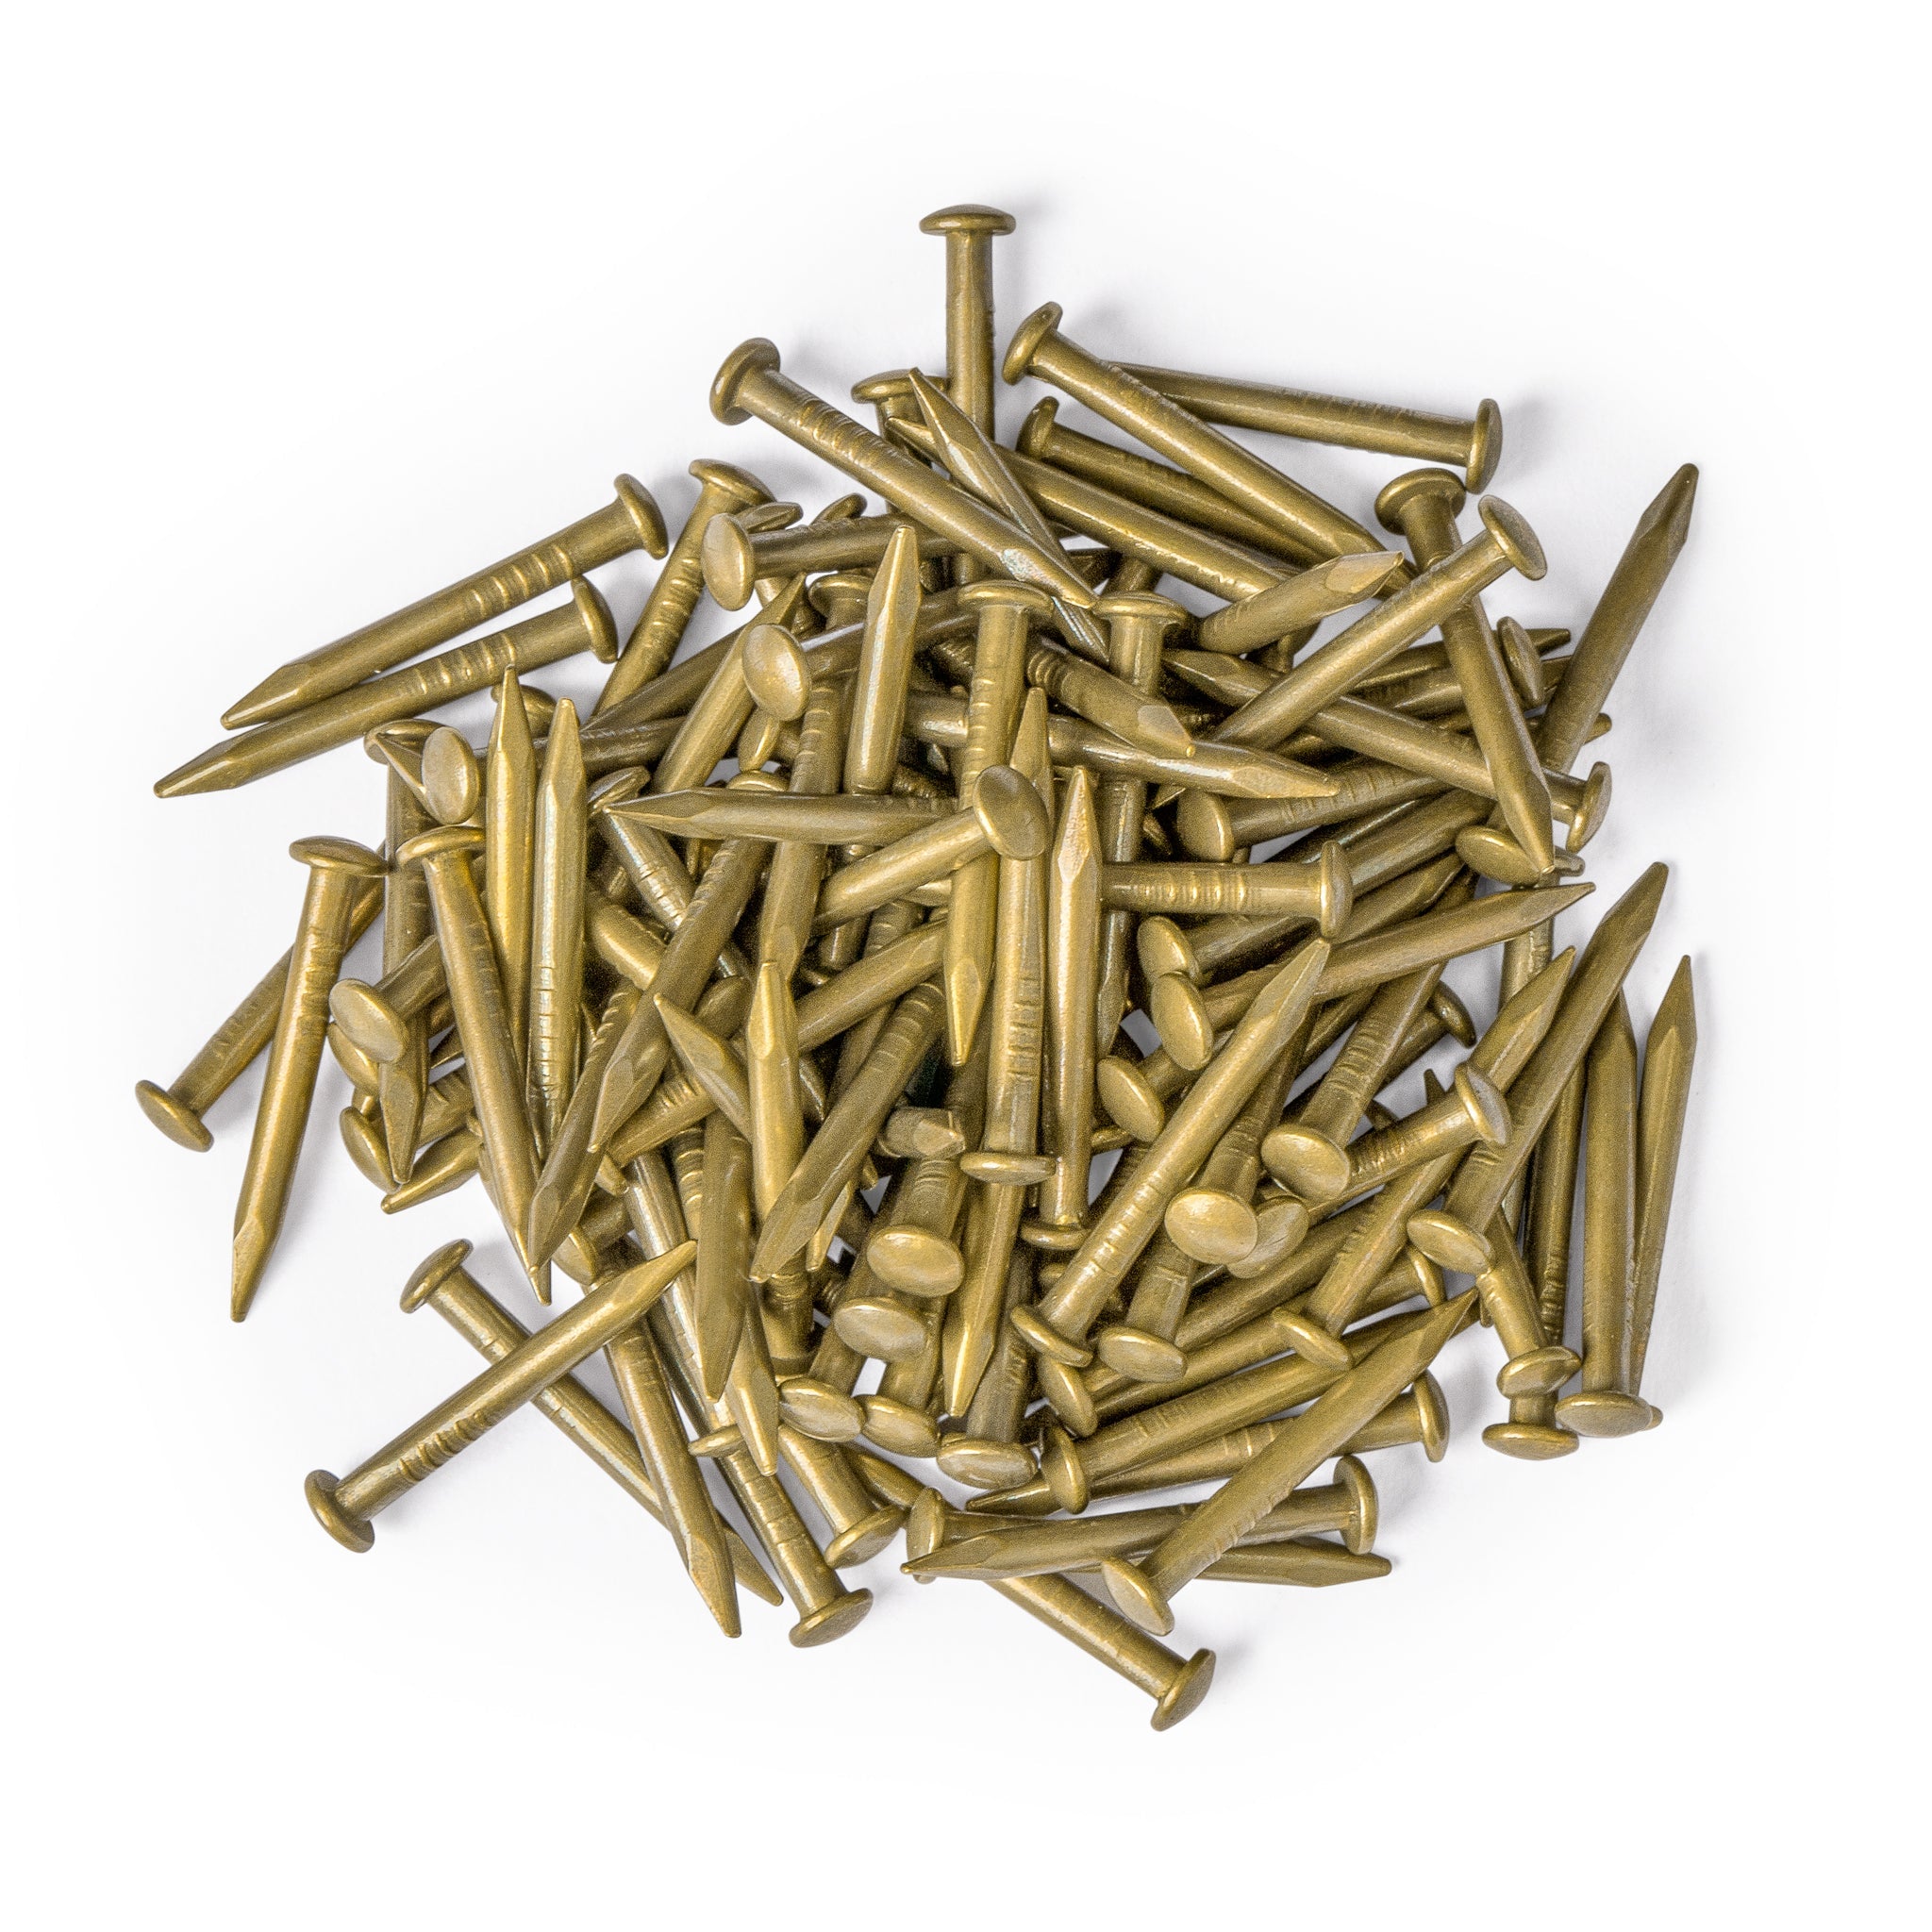 0.6" Pure Brass Nails - Bag of 100-Chinese Brass Hardware